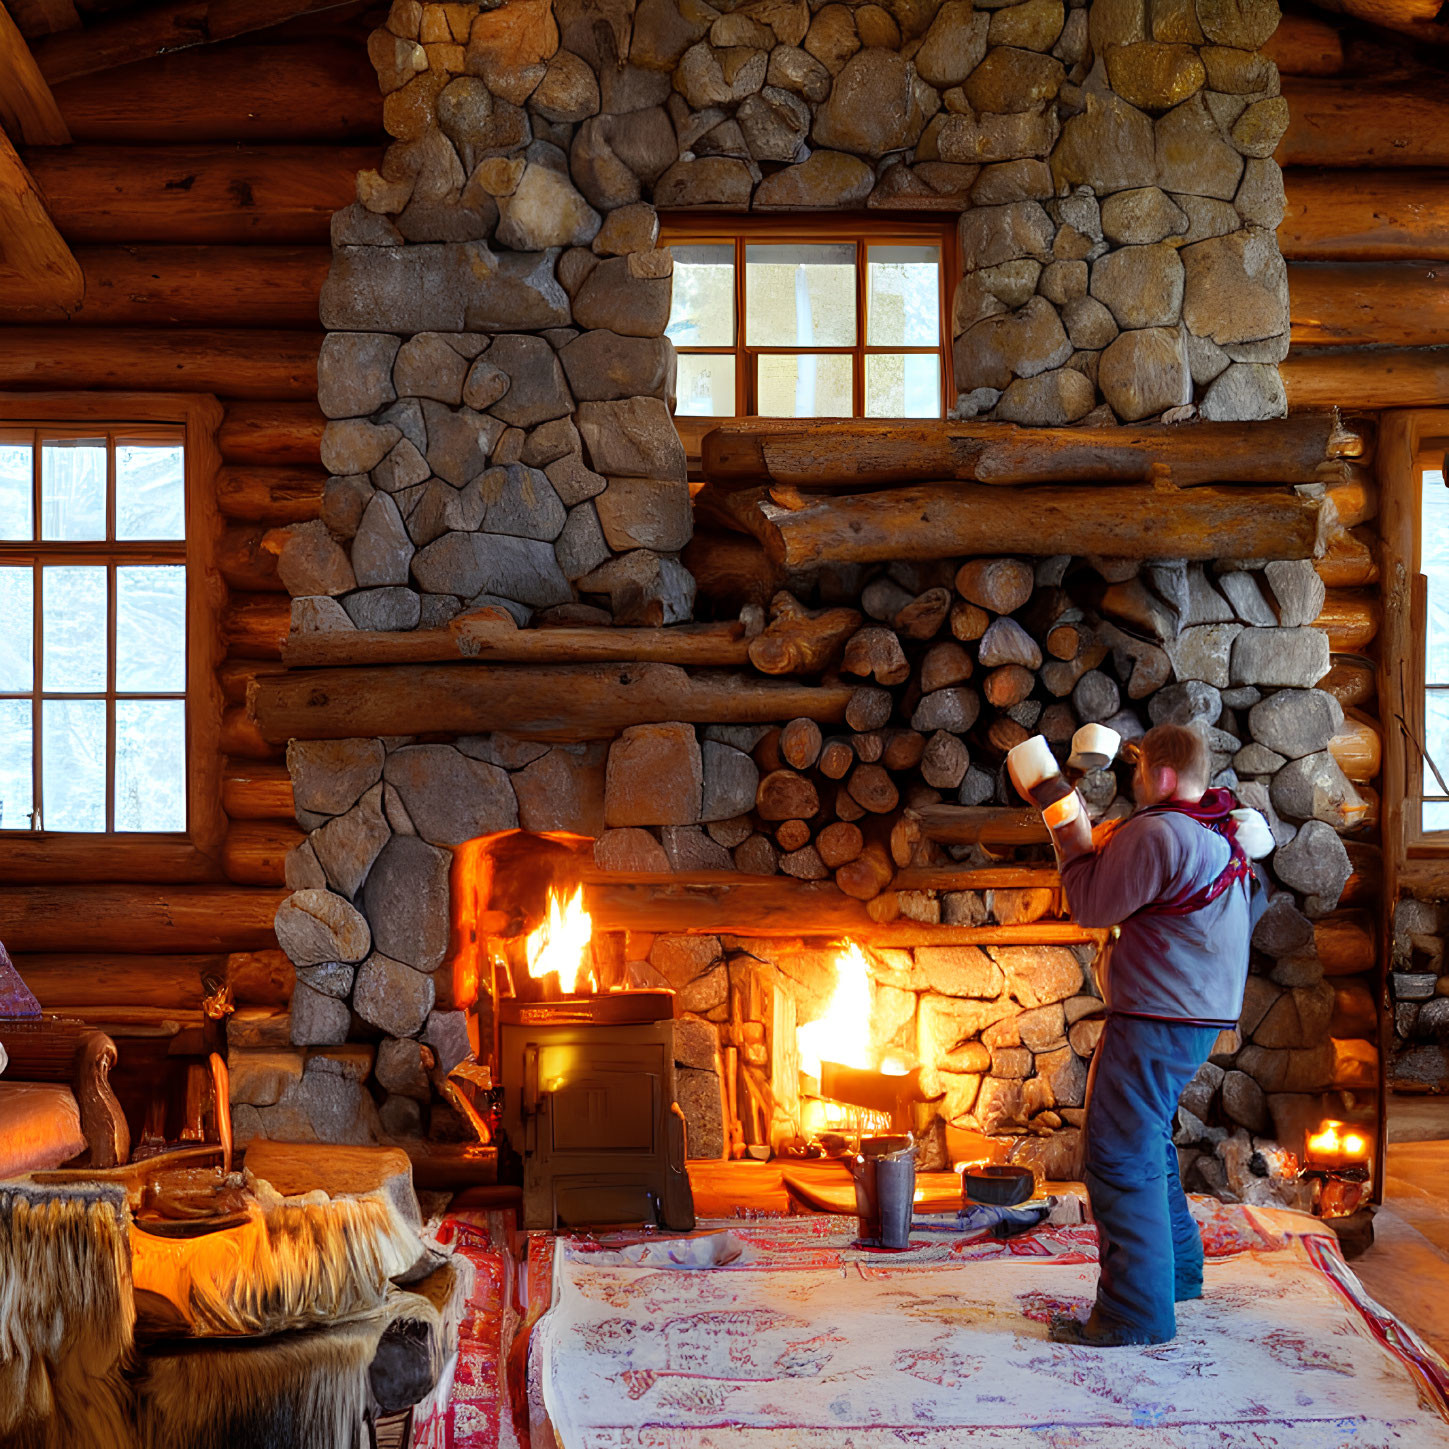 Person reading by cozy fireplace in rustic log cabin with stone and wood decor